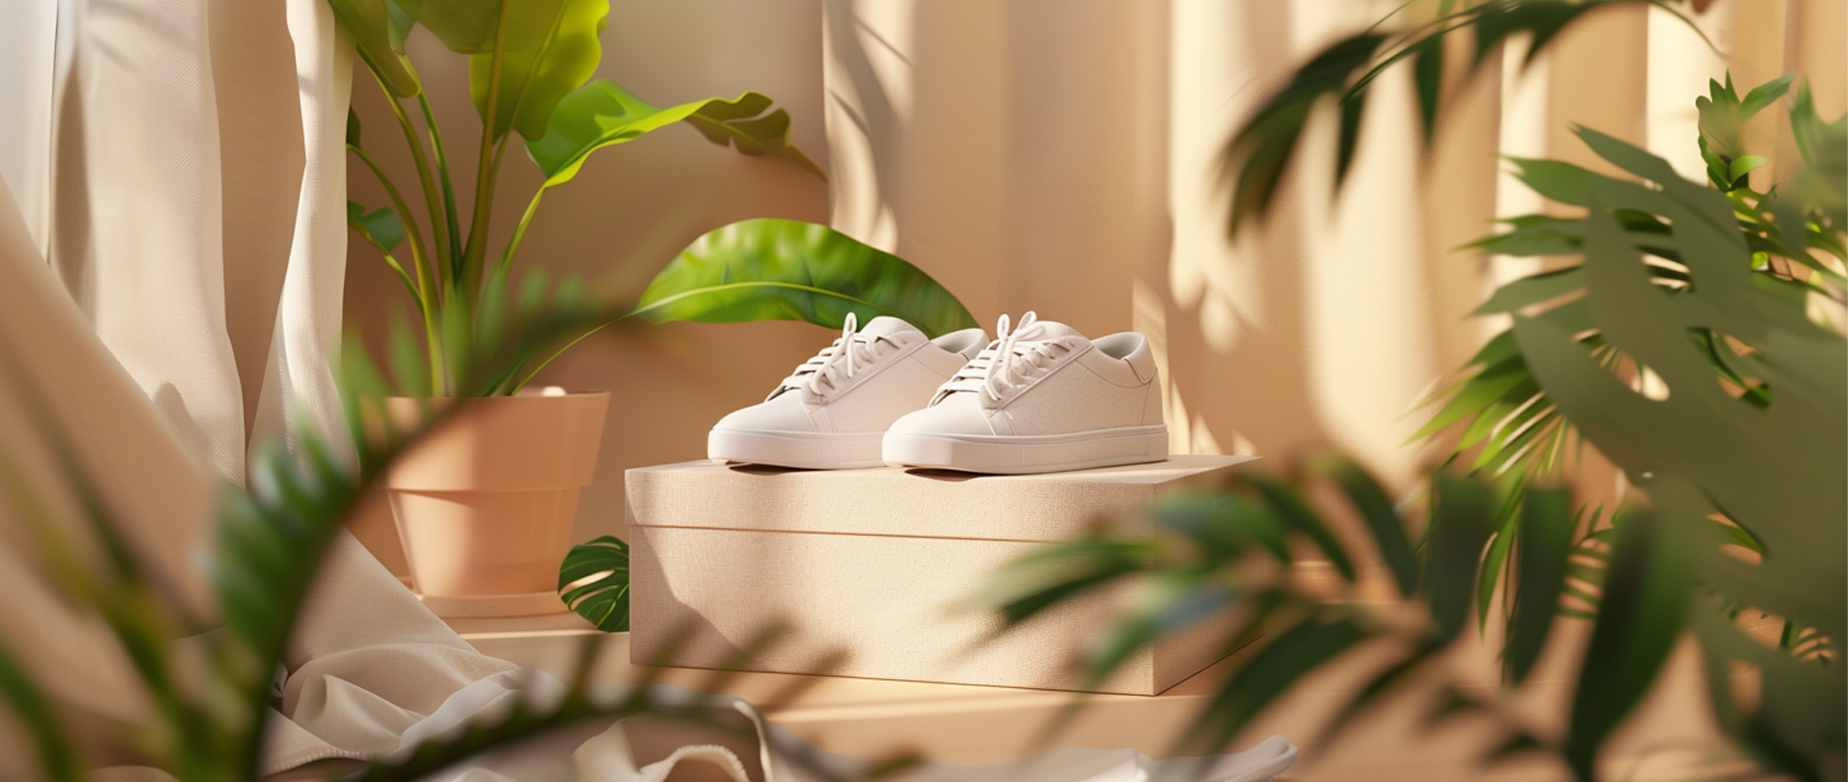 A pair of white sneakers on a display surrounded by plants.